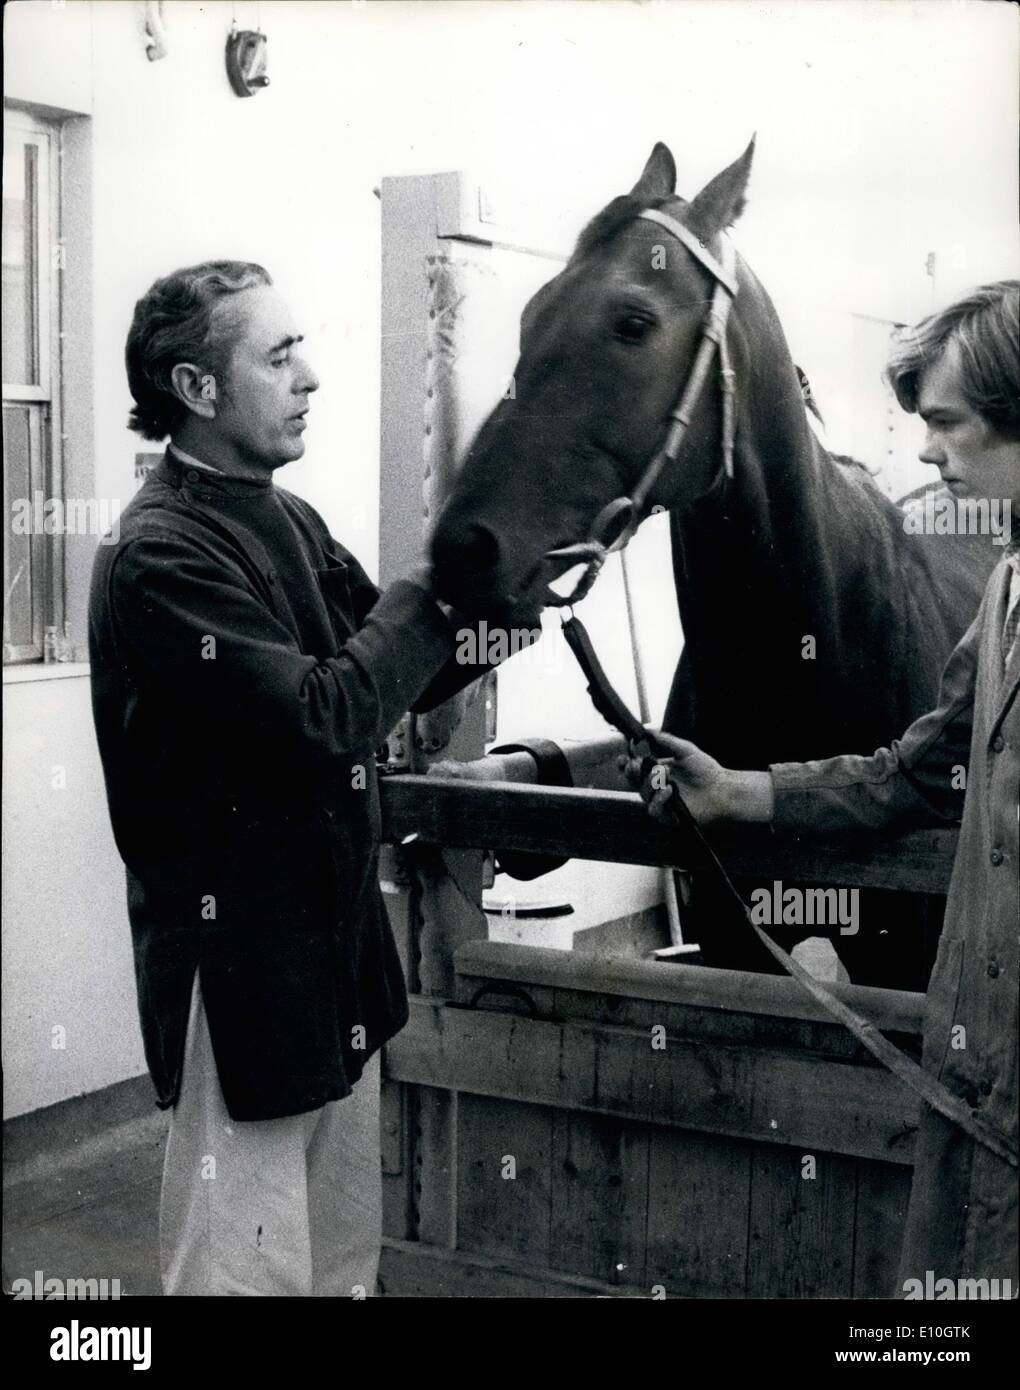 Nov. 11, 1972 - Surgeon who operated on Mill Reef given notice to quit house.: Mr. Edwin James Roberts, 54, the racehorse surgeon who operated on champion racehorse Mill Reef when the colt fractured its left fore cannon bone and fetlock, has been given notice to quit hi small lodge house at Lanwades Park, Kentfors, Suffolk. The house is owned by the Animal Health Trust, which manages the Equine Research Station at Kentford. Mr. Roberts was employed at the station for 20 years until September last year and left after a dispute over clinical research policy. Photo shows Mr Stock Photo